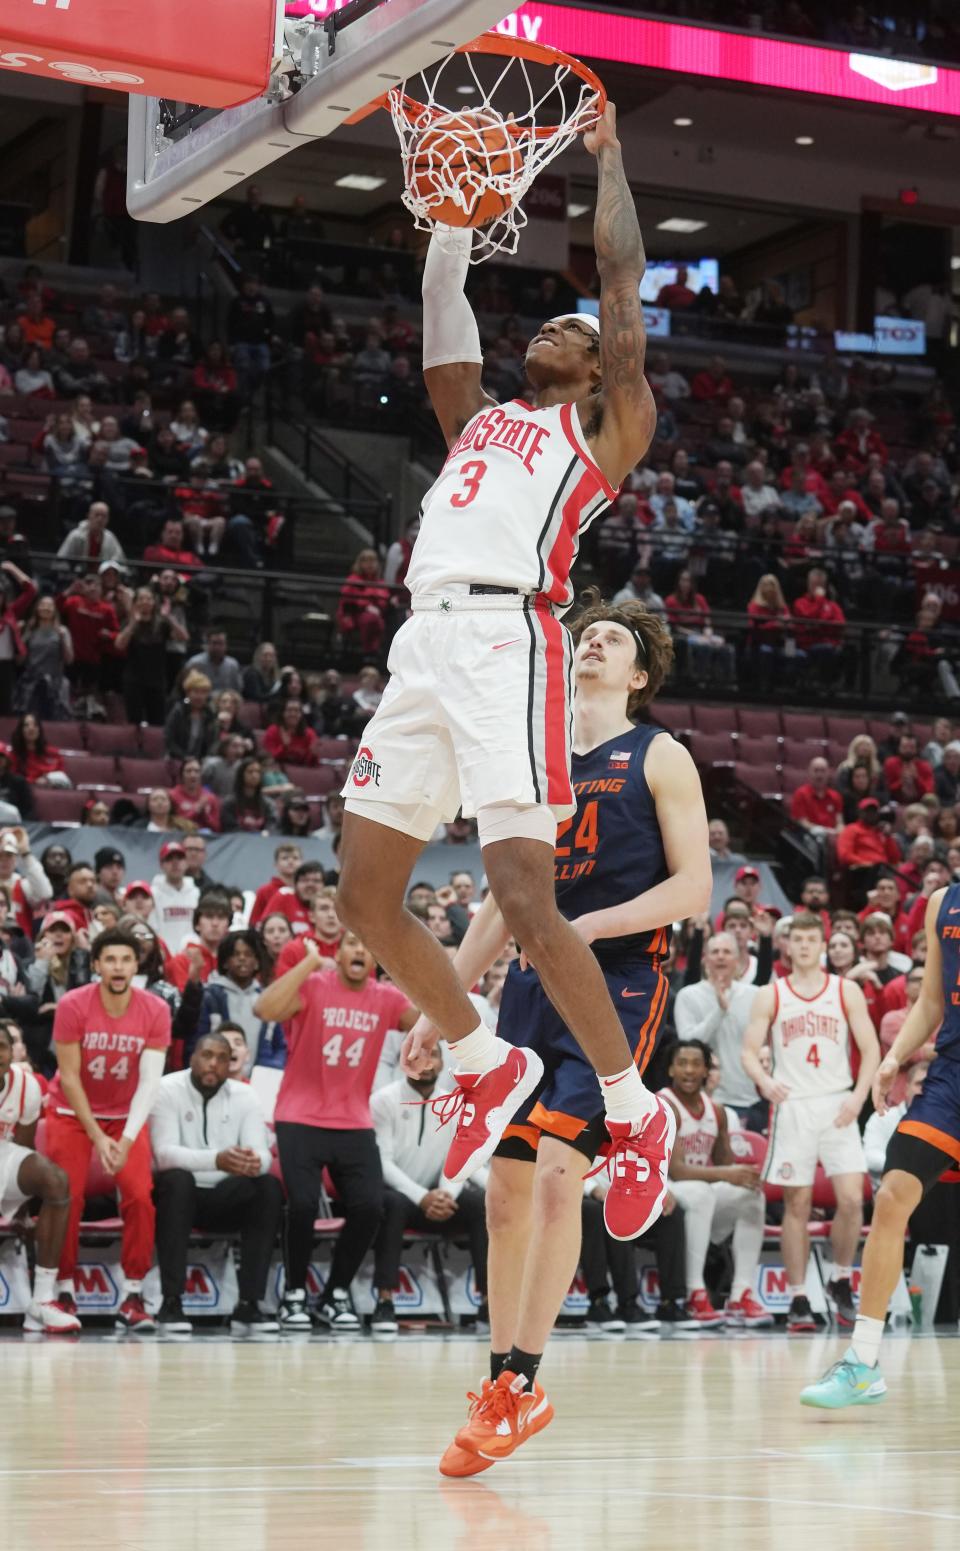 Feb 26, 2023; Columbus, OH, USA; Ohio State Buckeyes guard Eugene Brown III (3) dunks during NCAA basketball game Feb. 26, 2023 at Value City Arena. Mandatory Credit: Doral Chenoweth-The Columbus Dispatch